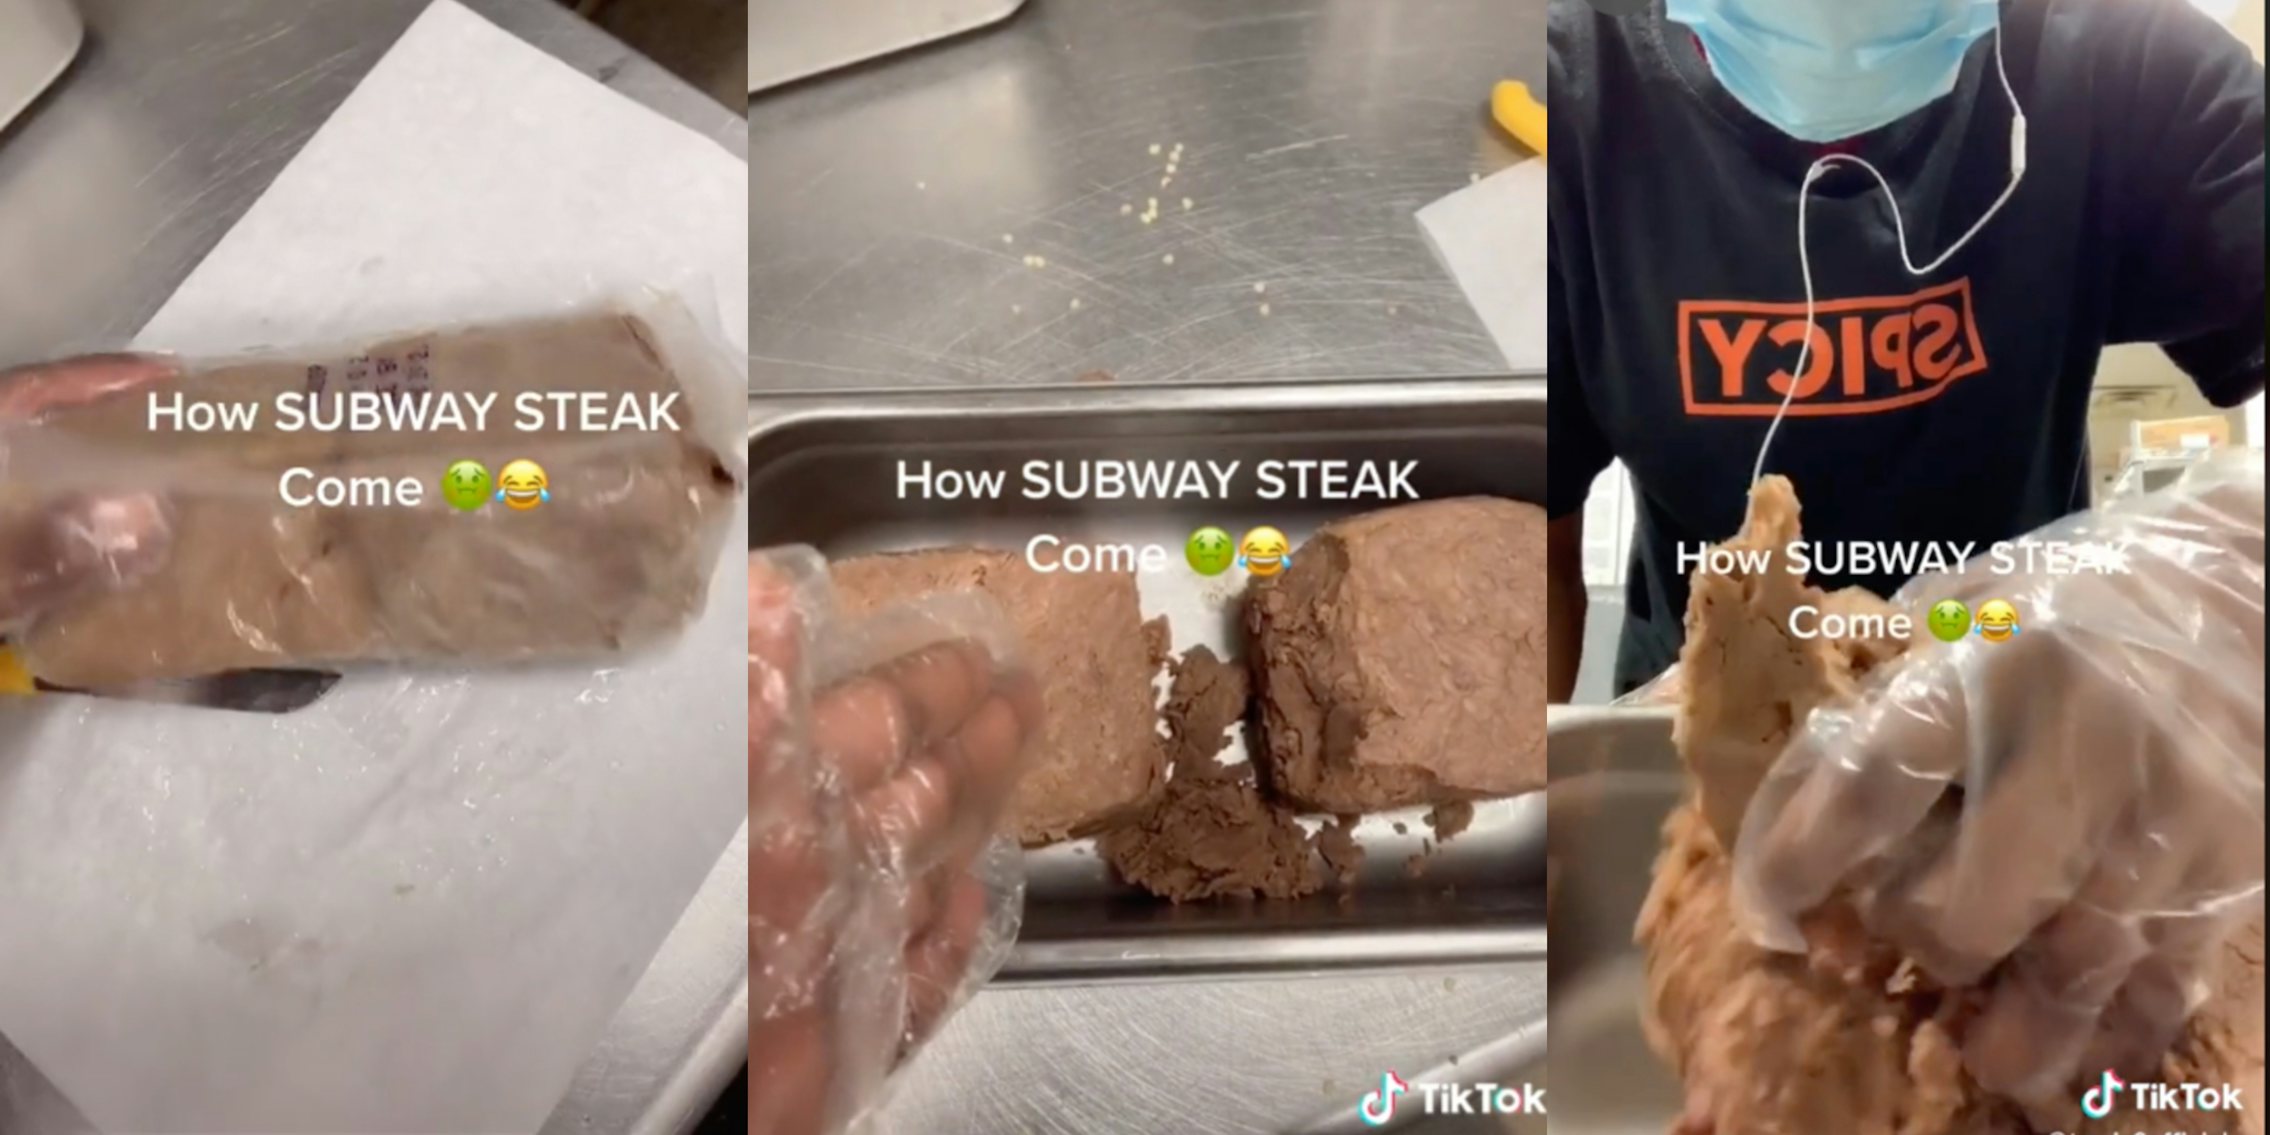 Subway steak in cube wrapped, Cut up cube of subway steak, Subway worker mashing up chunk of subway steak